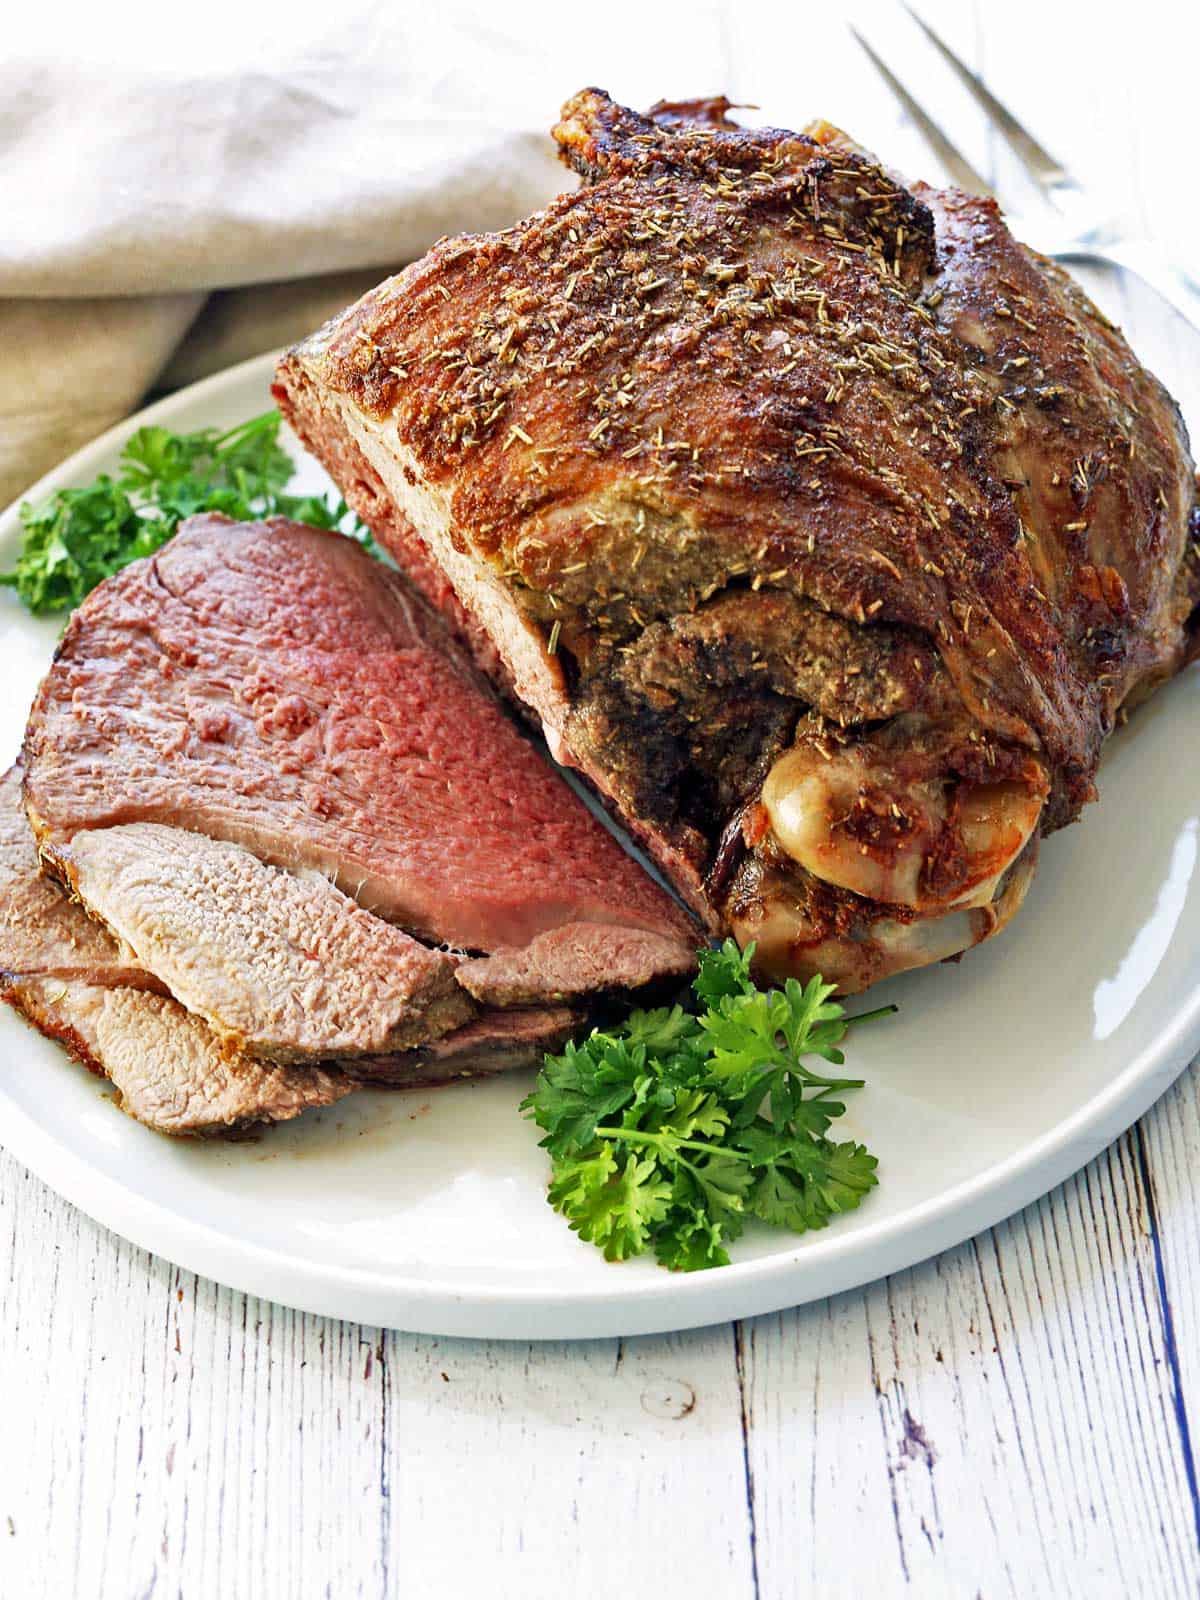 A roasted leg of lamb garnished with parsley.